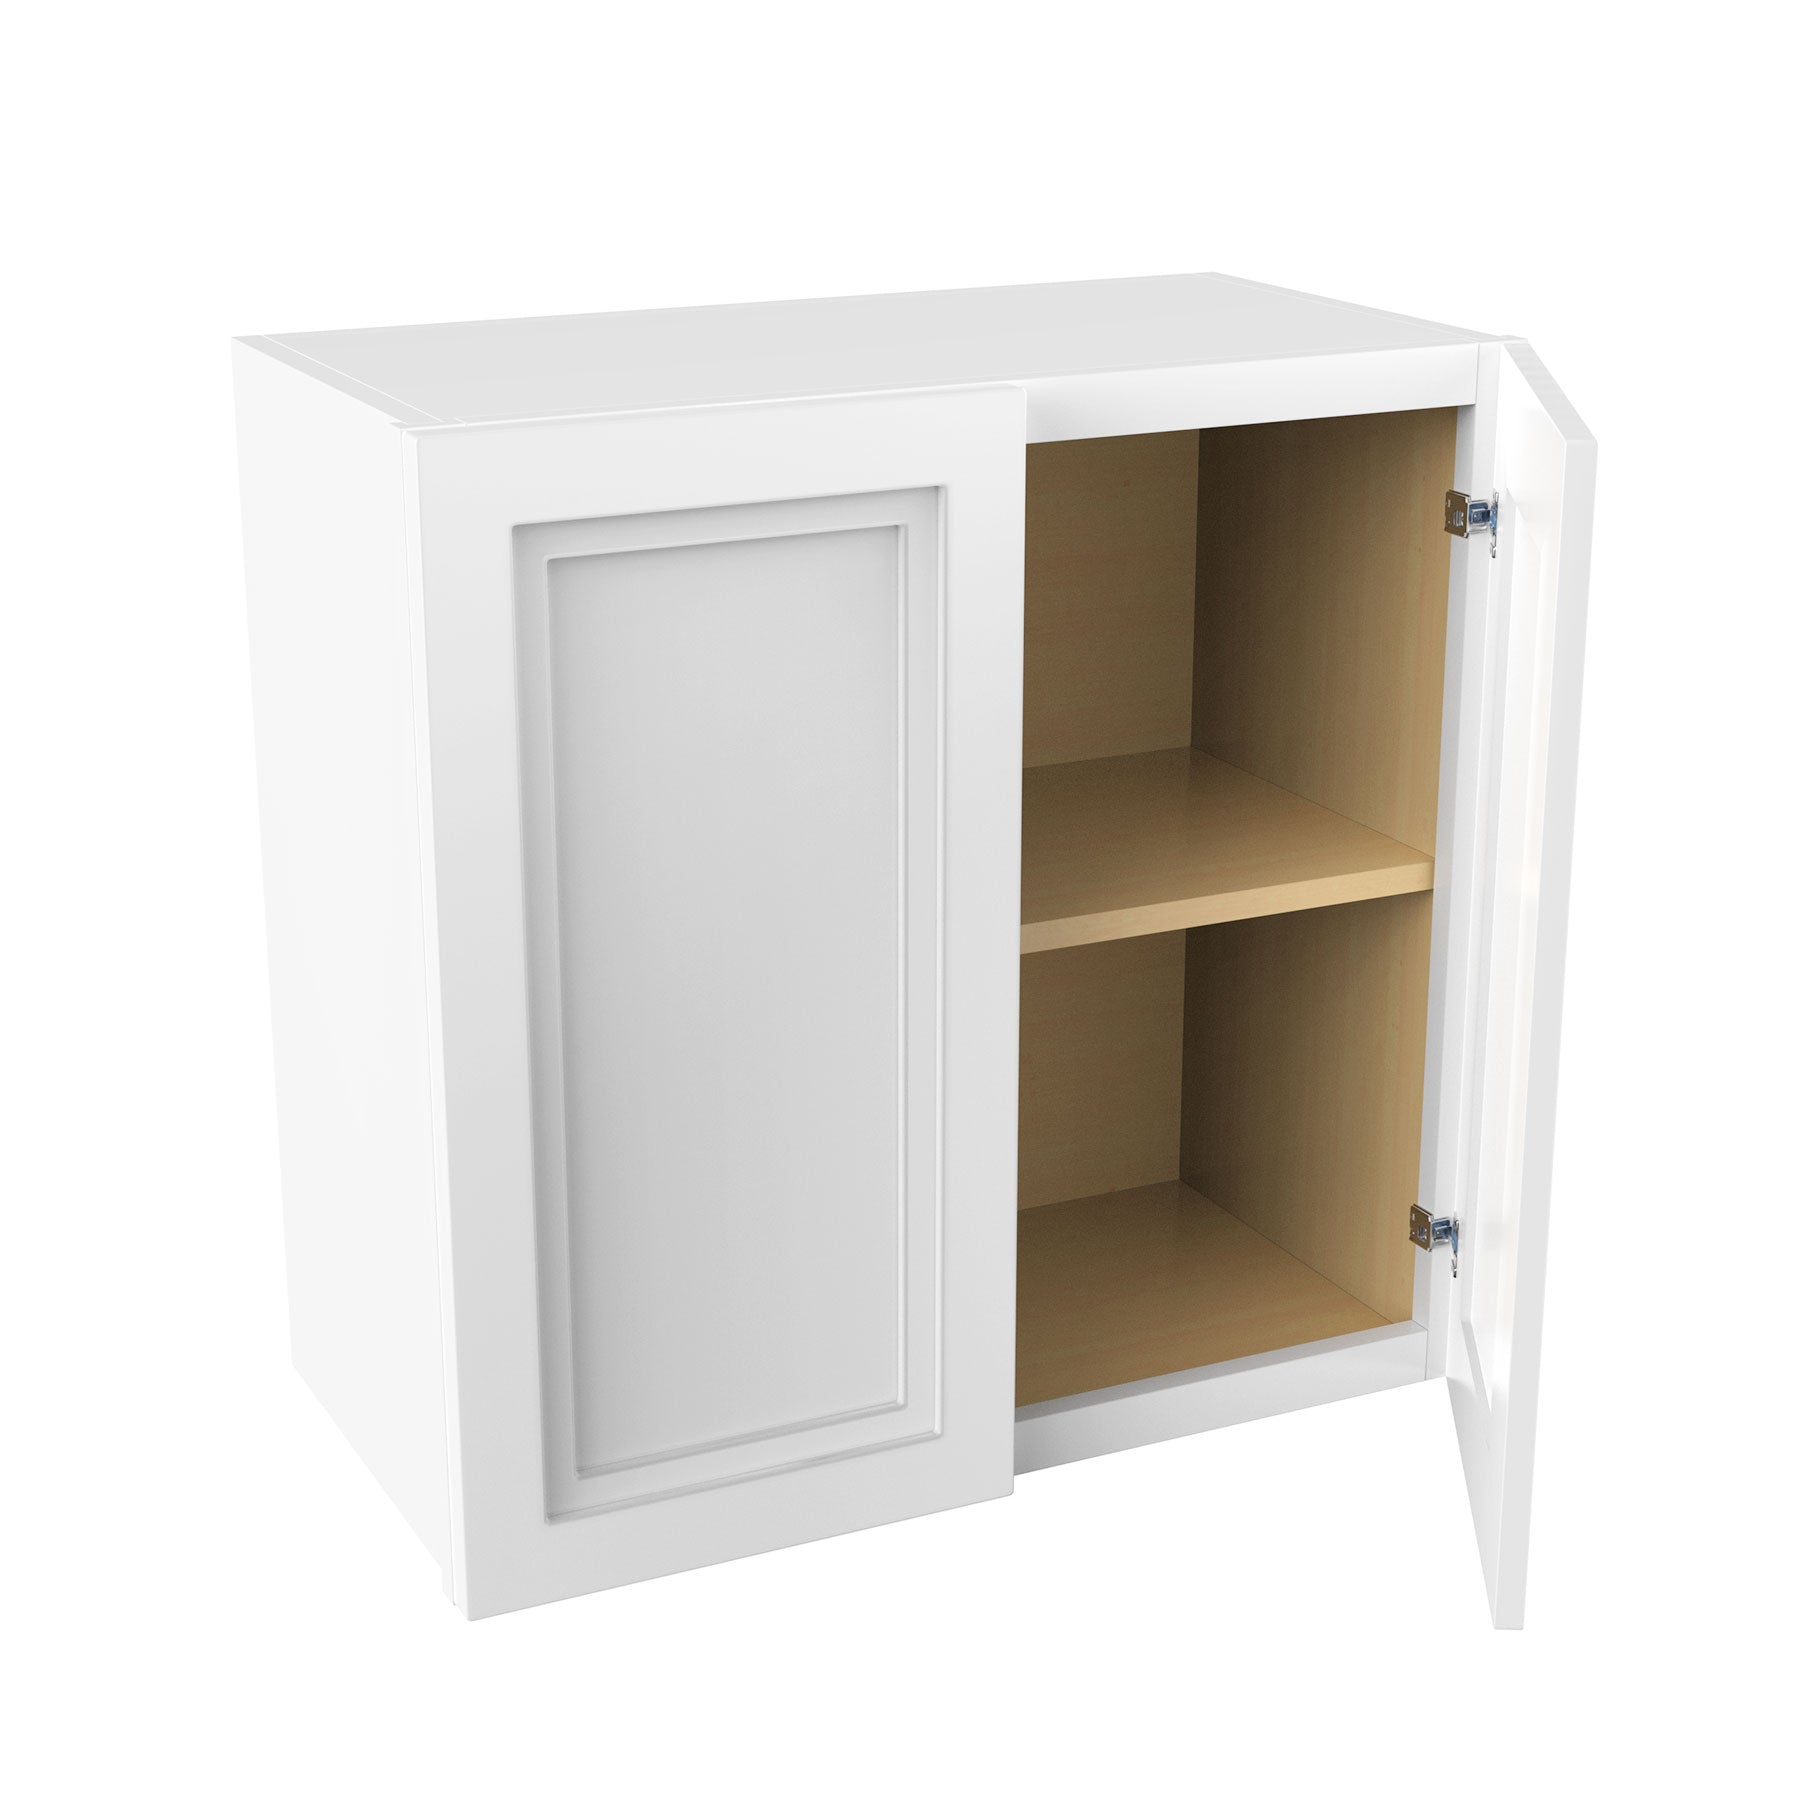 Fashion White - Double Door Wall Cabinet | 24"W x 24"H x 12"D